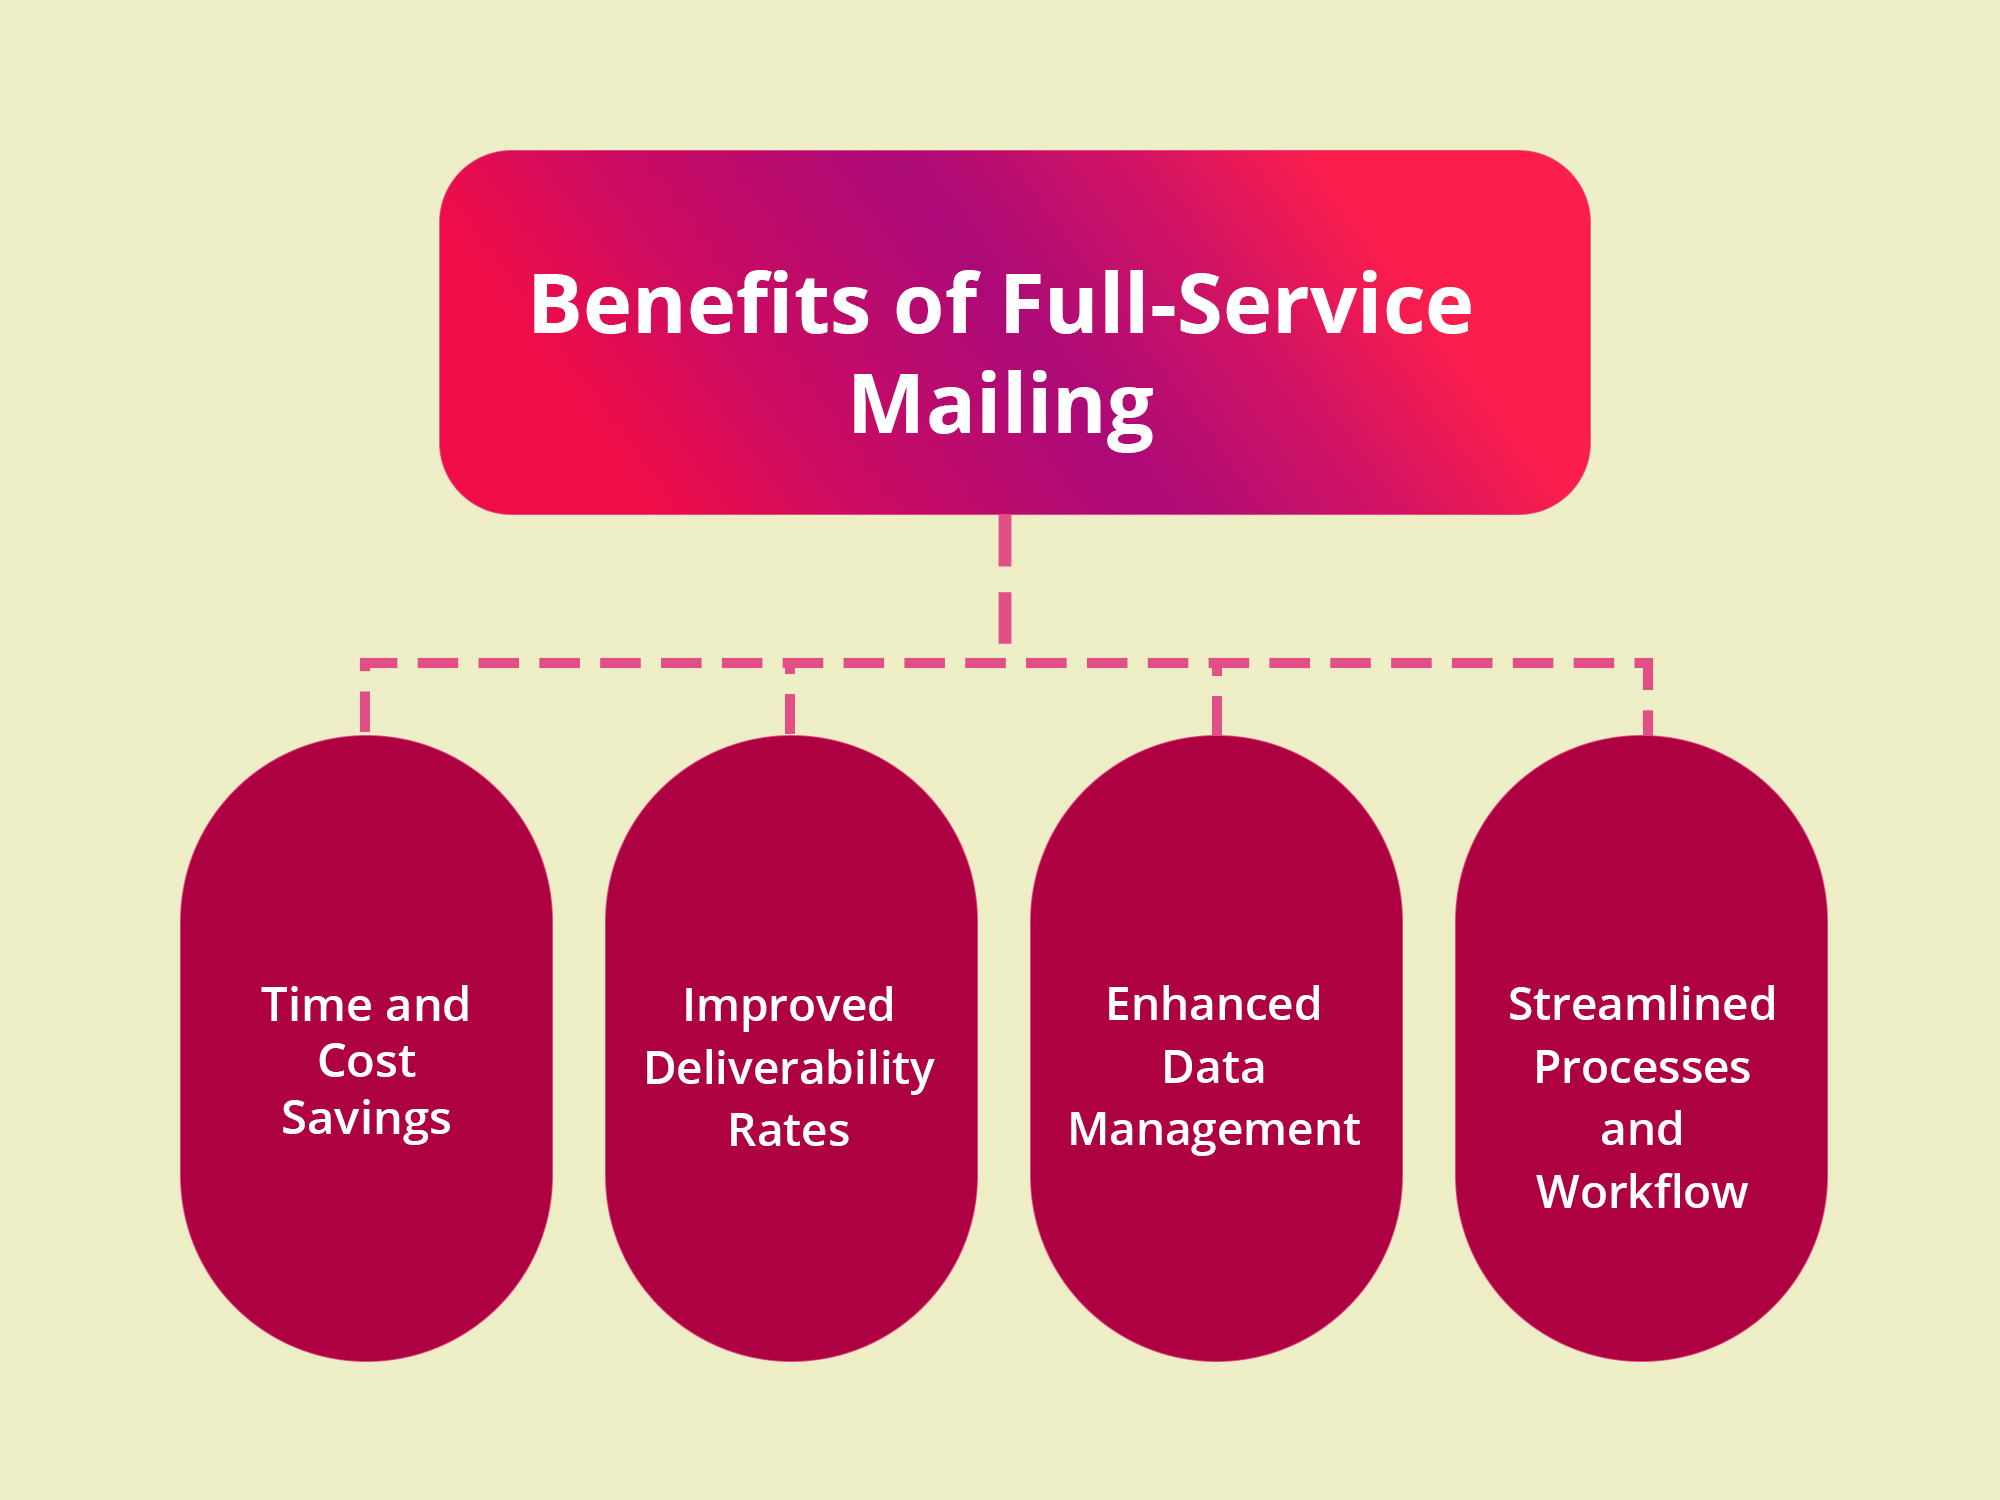 Benefits of Full-Service Mailing